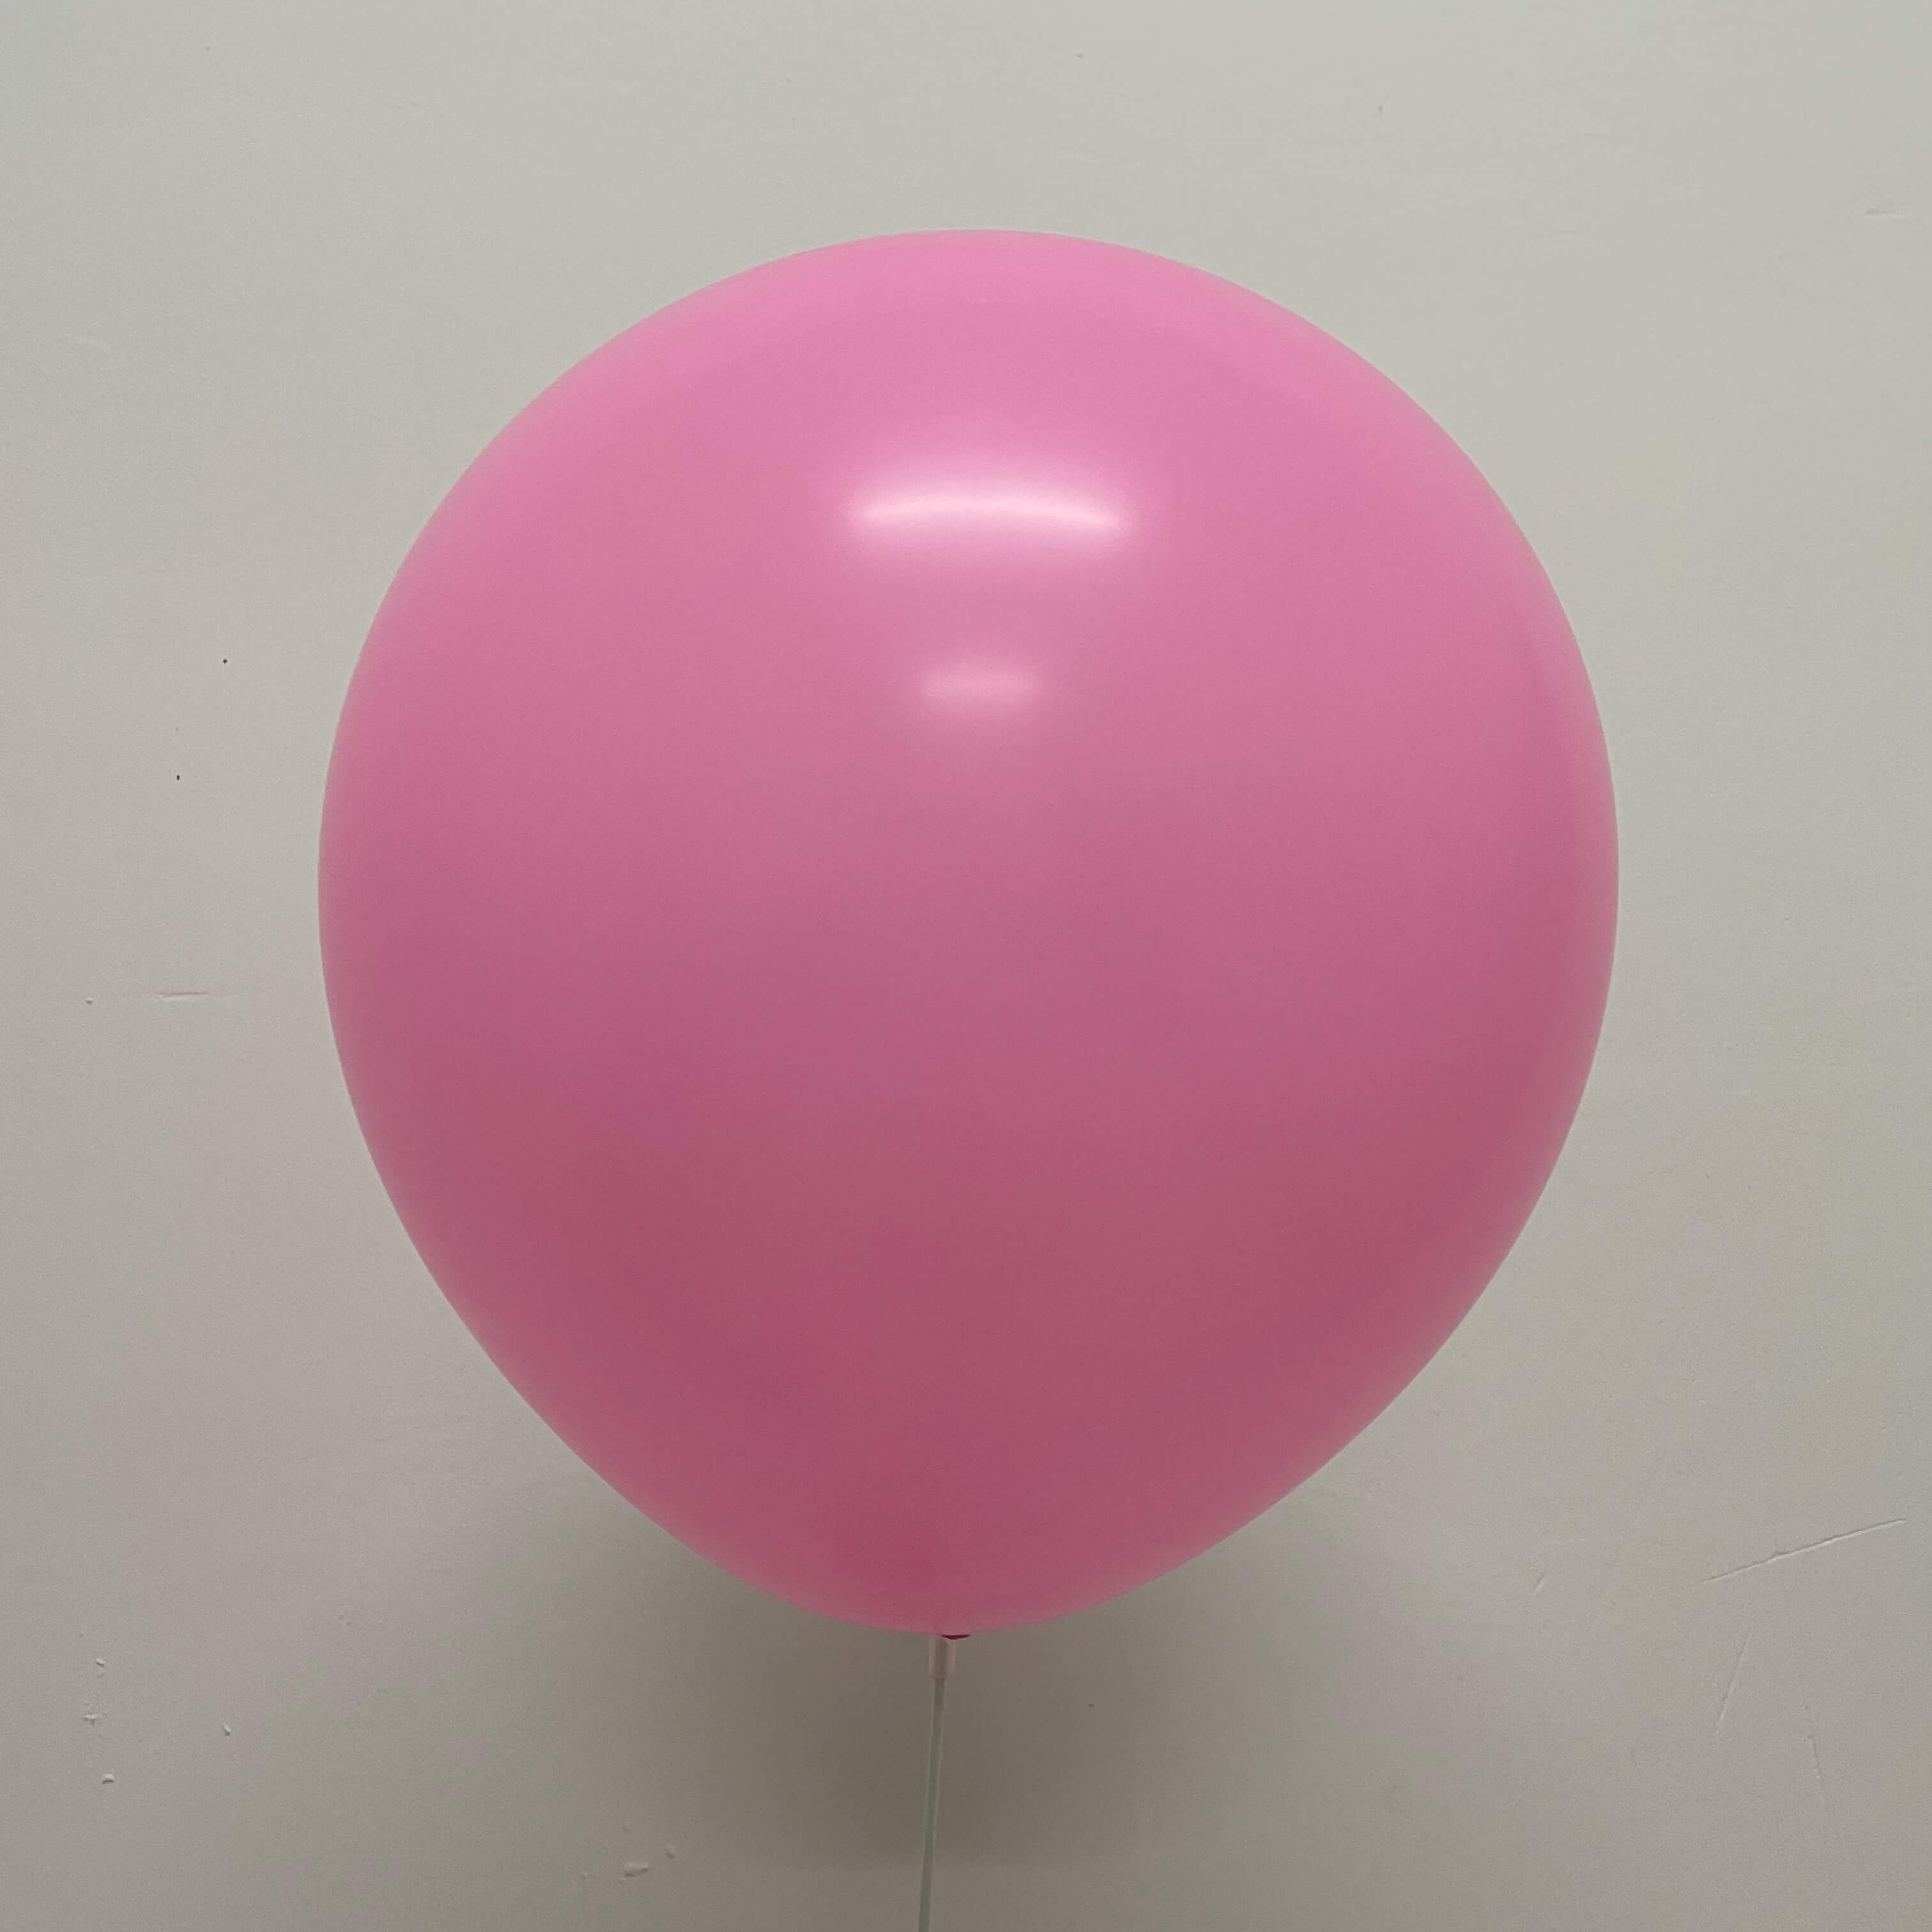 High-Quality Latex Balloons Wholesale - Eco-Friendly and Biodegradable